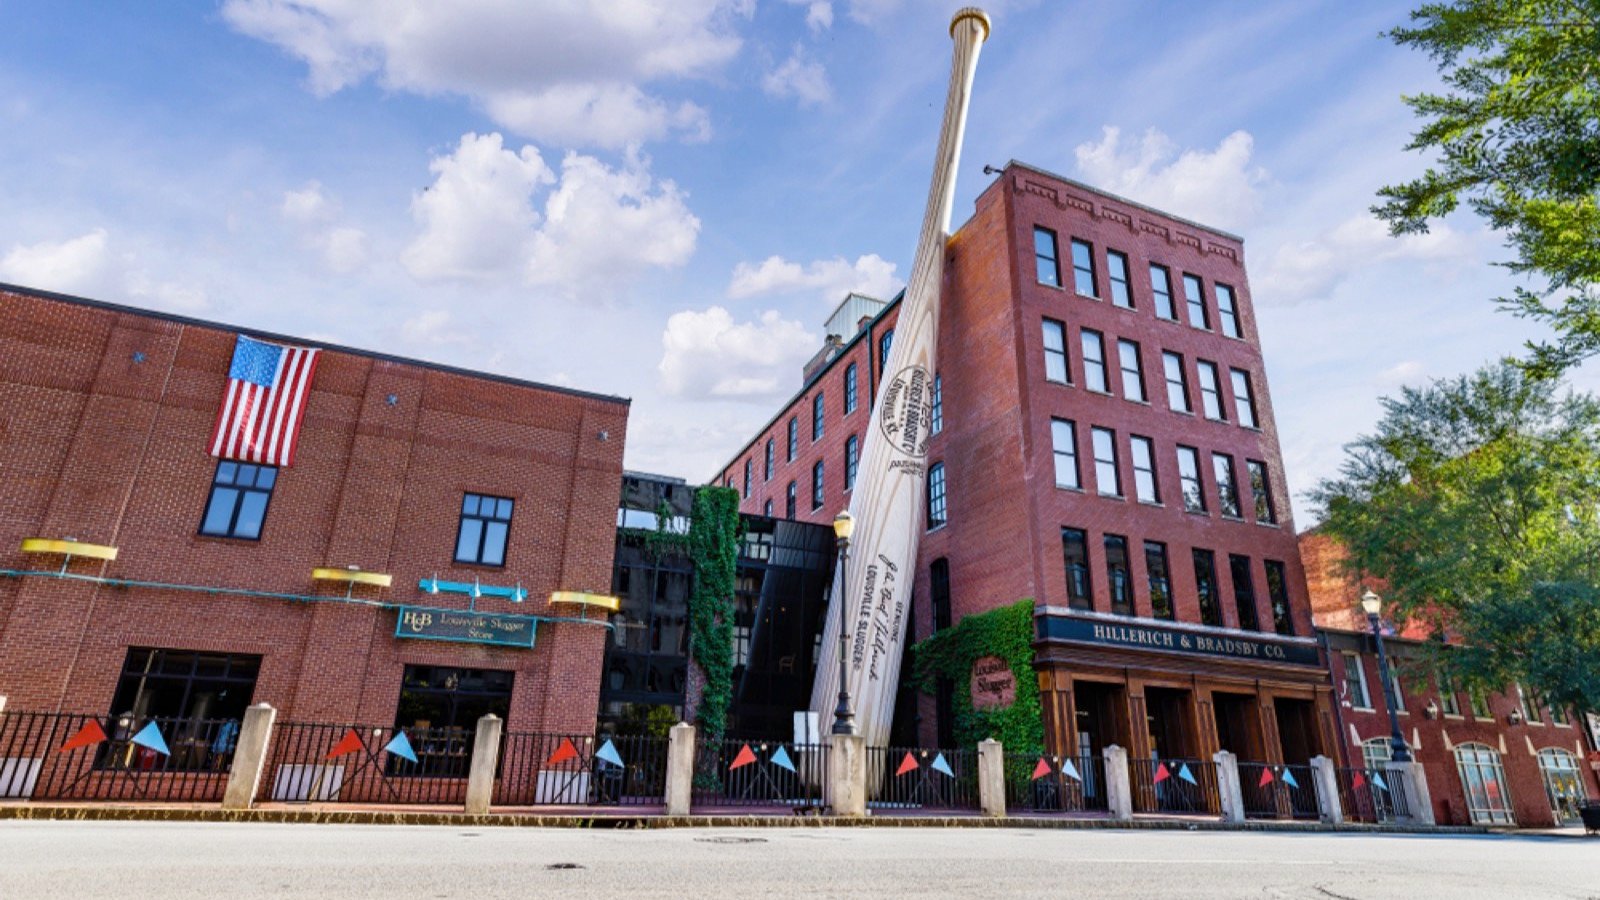 <p>The kids will love the 68,000-pound, 120-foot-tall baseball bat in the Louisville Slugger Museum. Even if the entire family doesn’t love baseball, the guided tours are fun and informative. The gift shop features merchandise for baseball fans.</p>